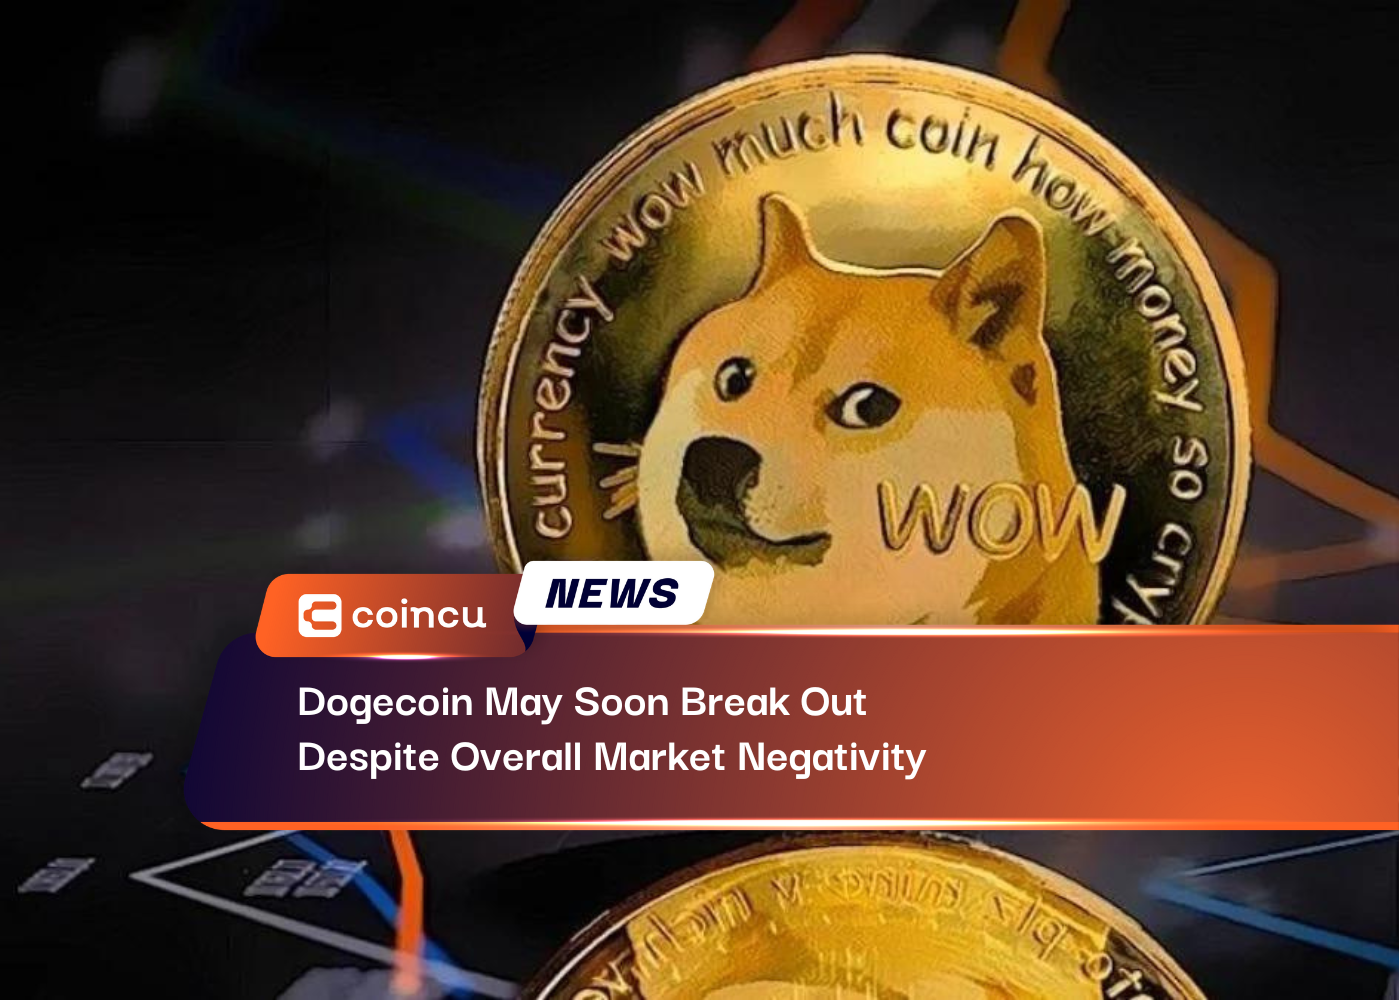 Dogecoin May Soon Break Out